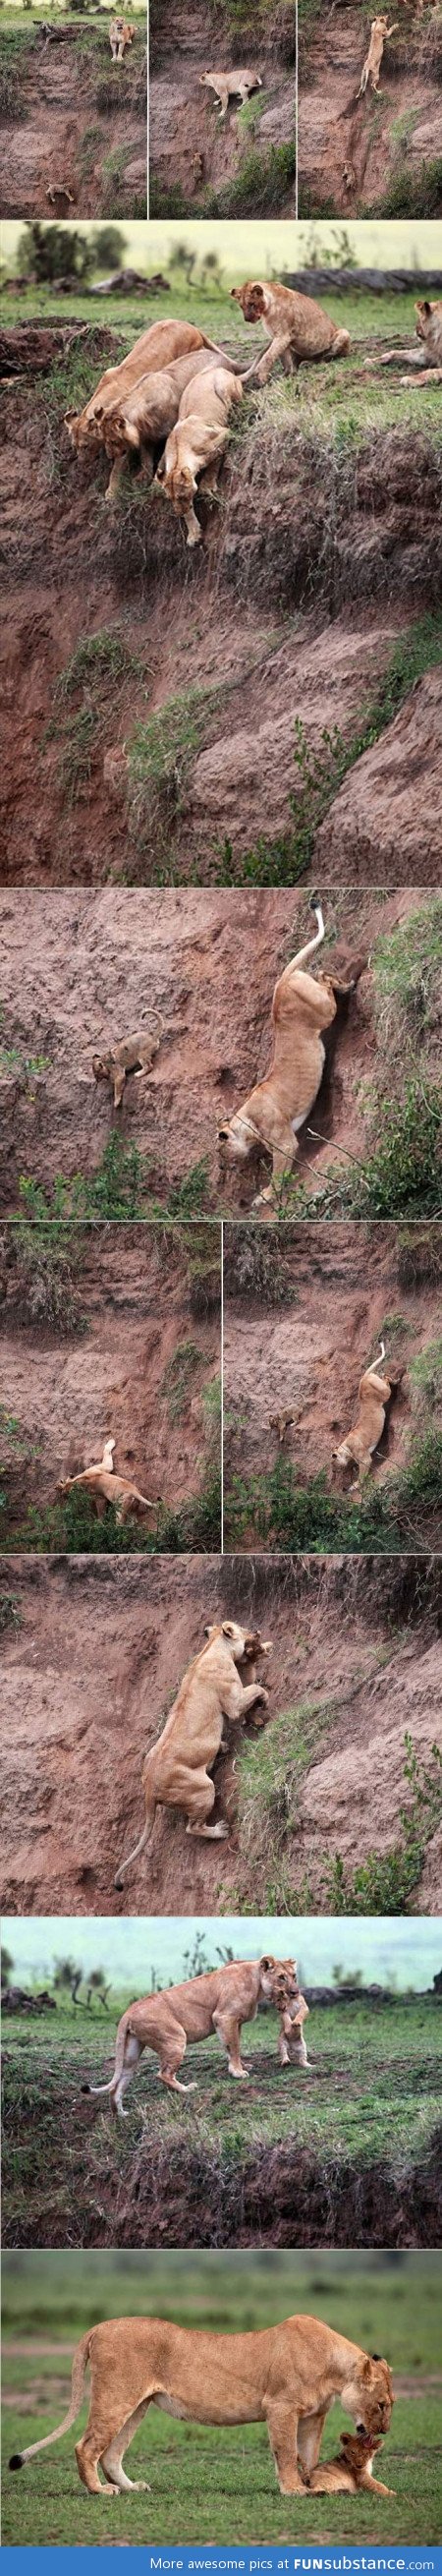 Momma lion saves her cub